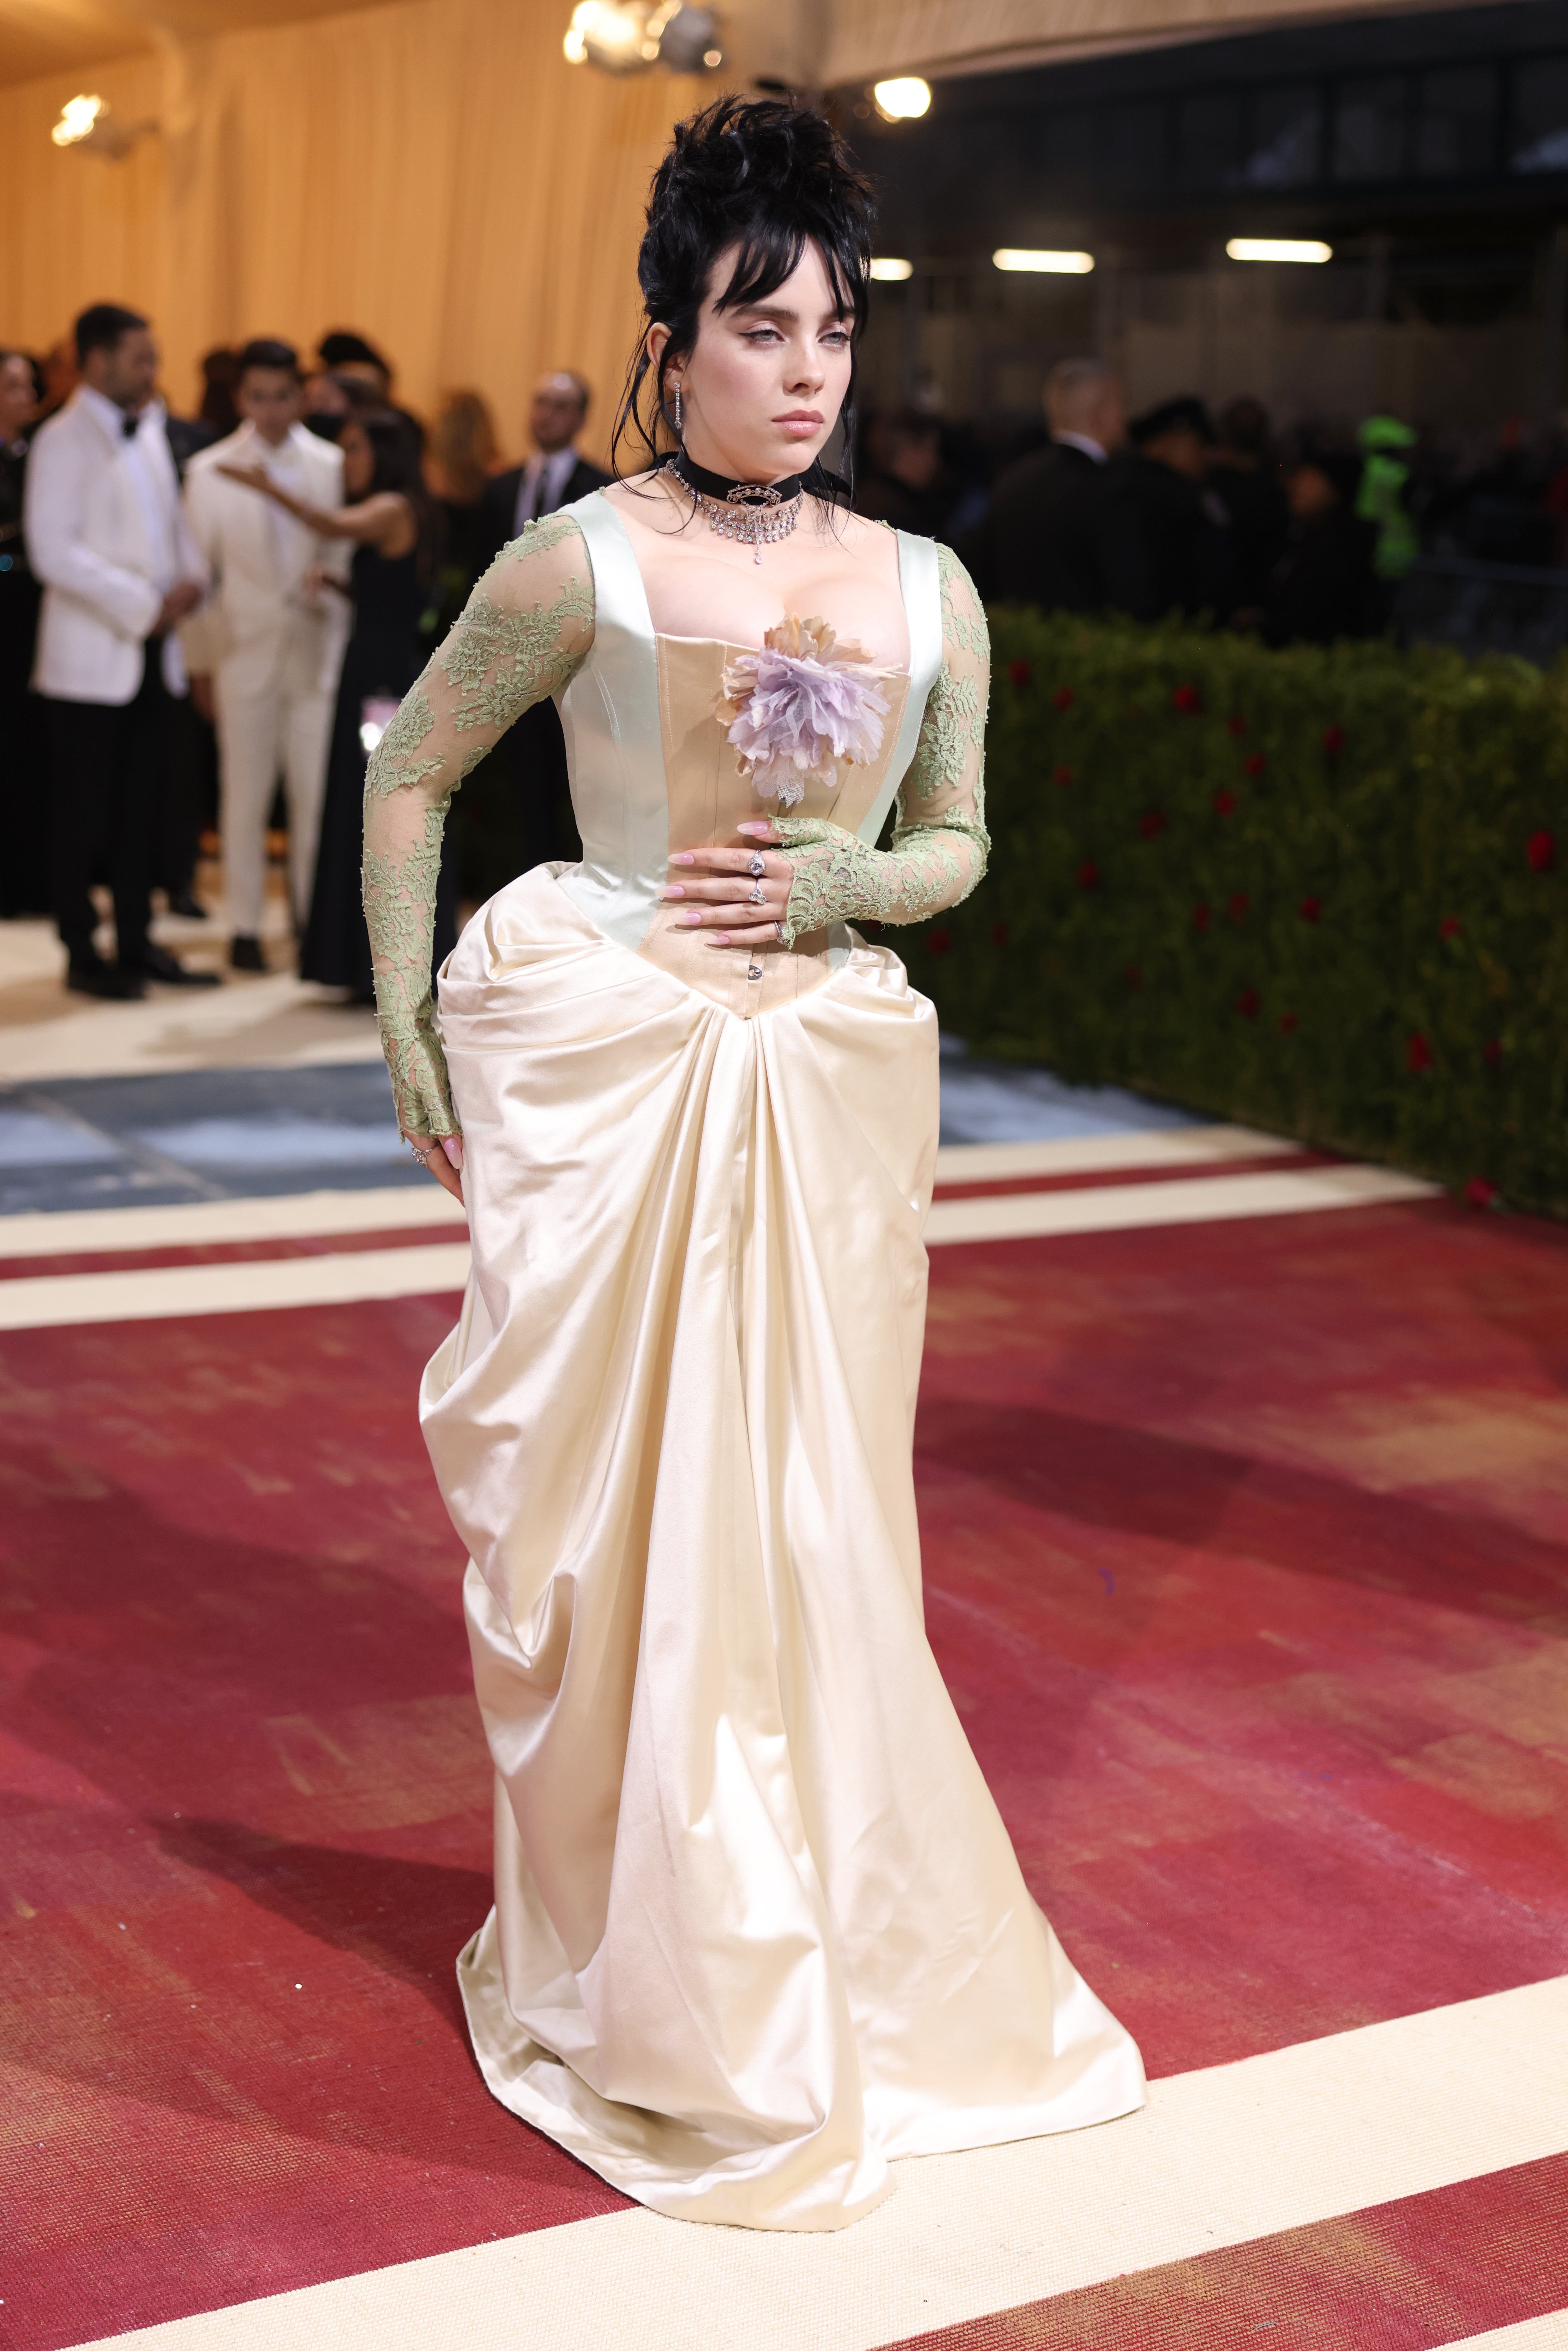 Met Gala 2022: Gilded Glamour theme details, attendees, how to watch